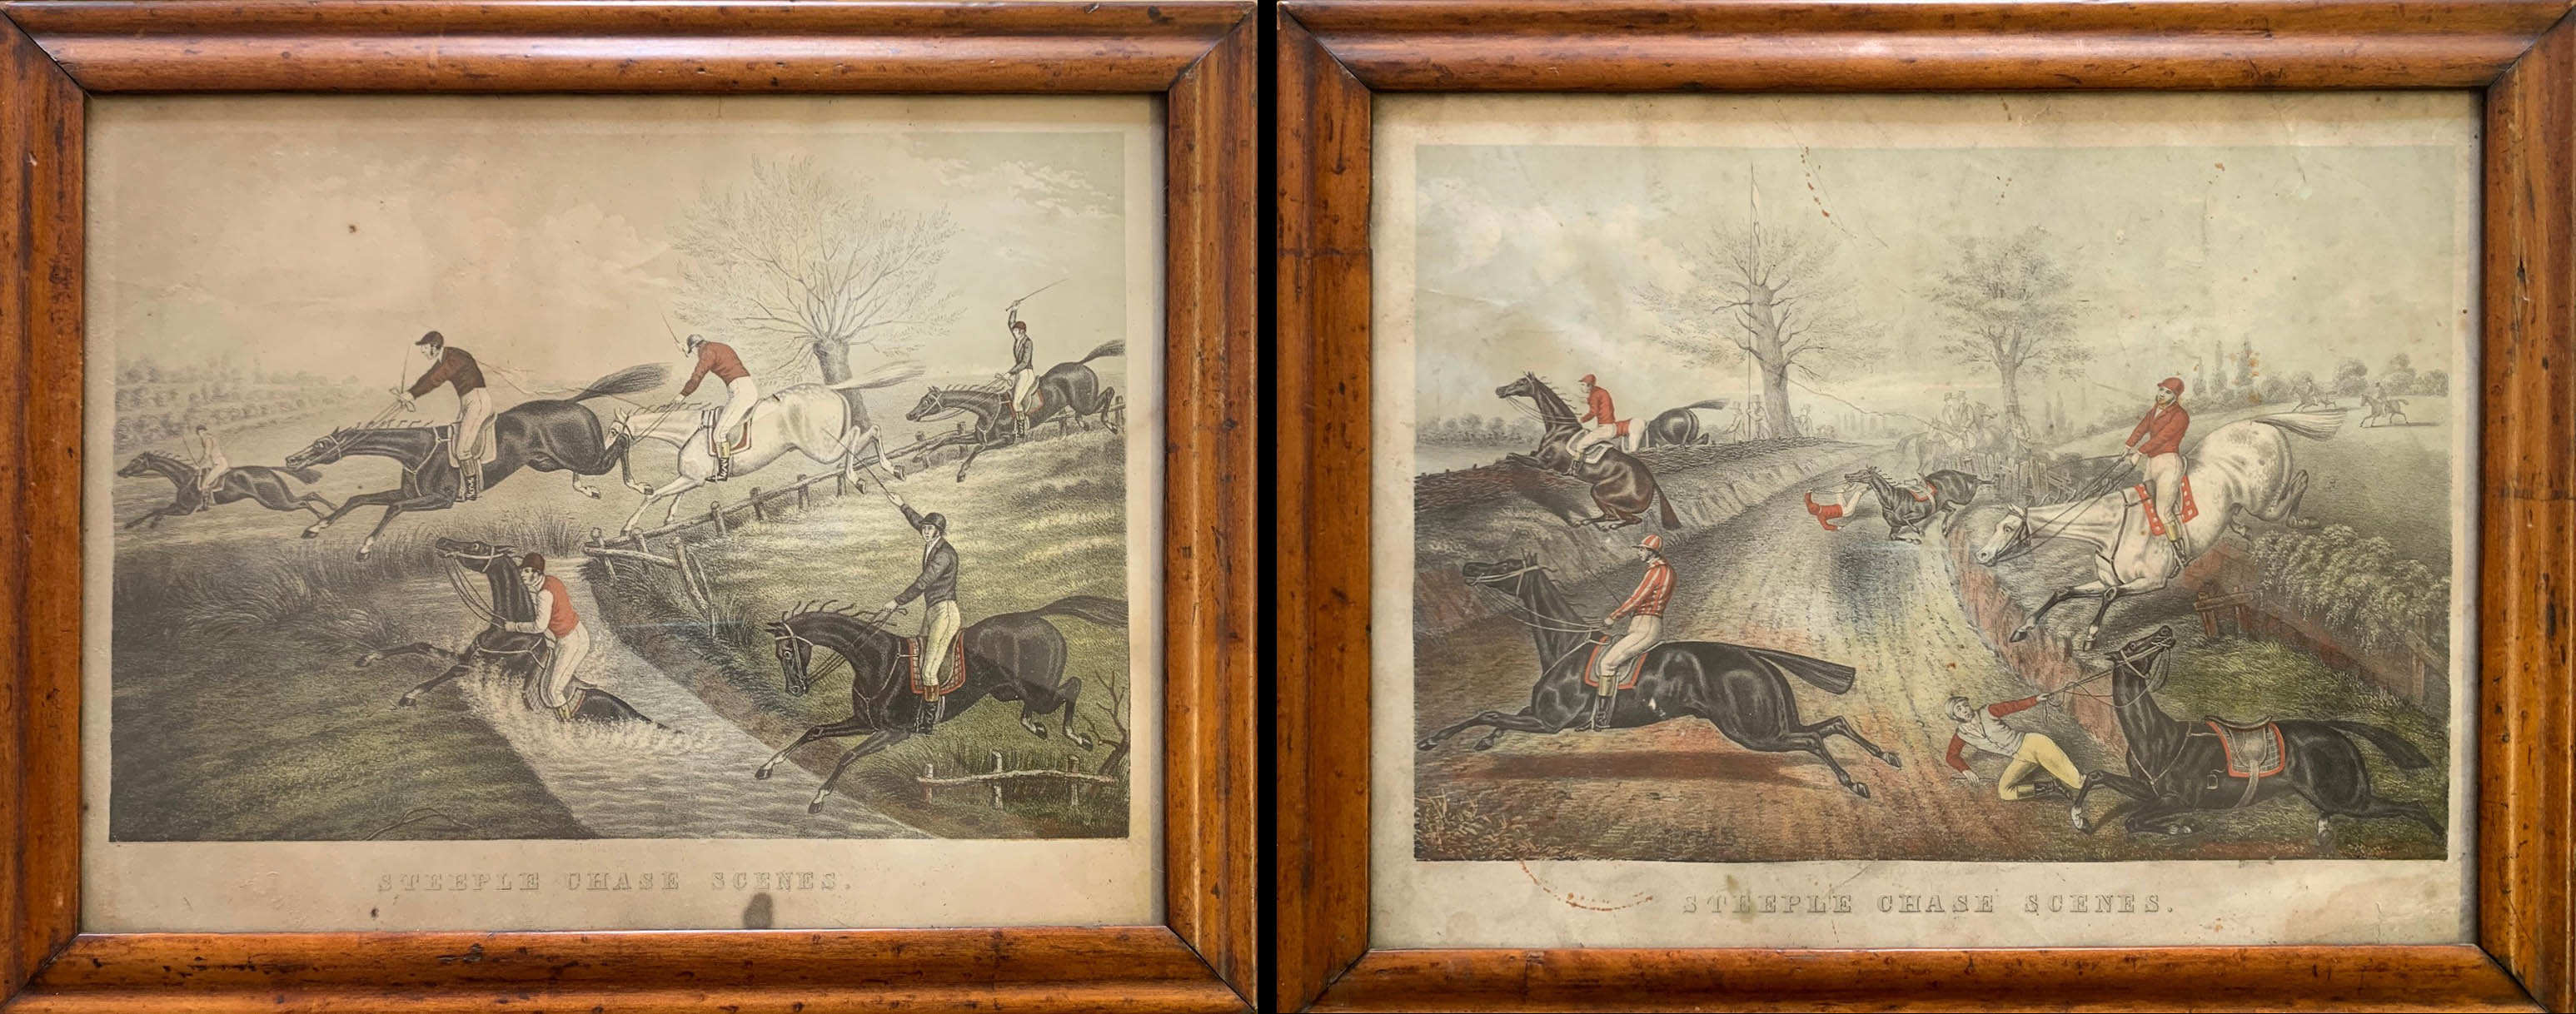 AFTER HENRY THOMAS ALKEN, TWO COLOURED PRINTS Titled 'Steeple Chase Scenes', held in 19th Century